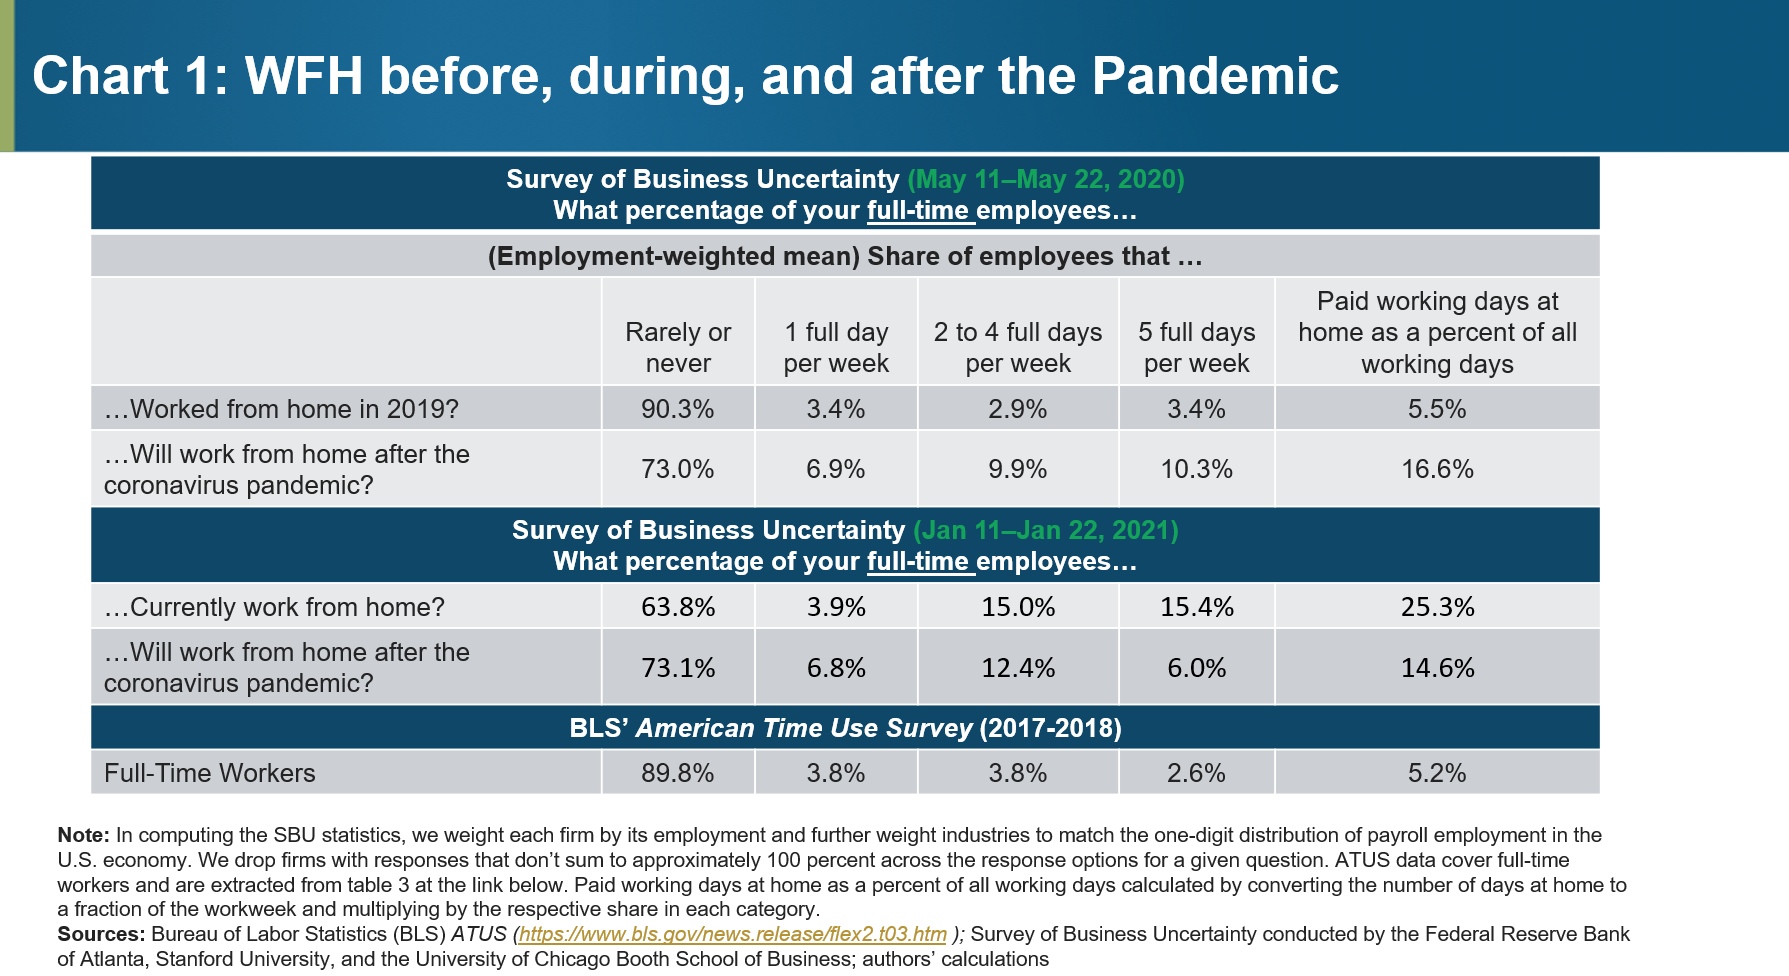 https://www.frbatlanta.org/-/media/images/blogs/macroblog/2021/0224-wfh-onstage-and-here-to-stay/chart-01-of-02-wft-before-during-after-pandemic.png